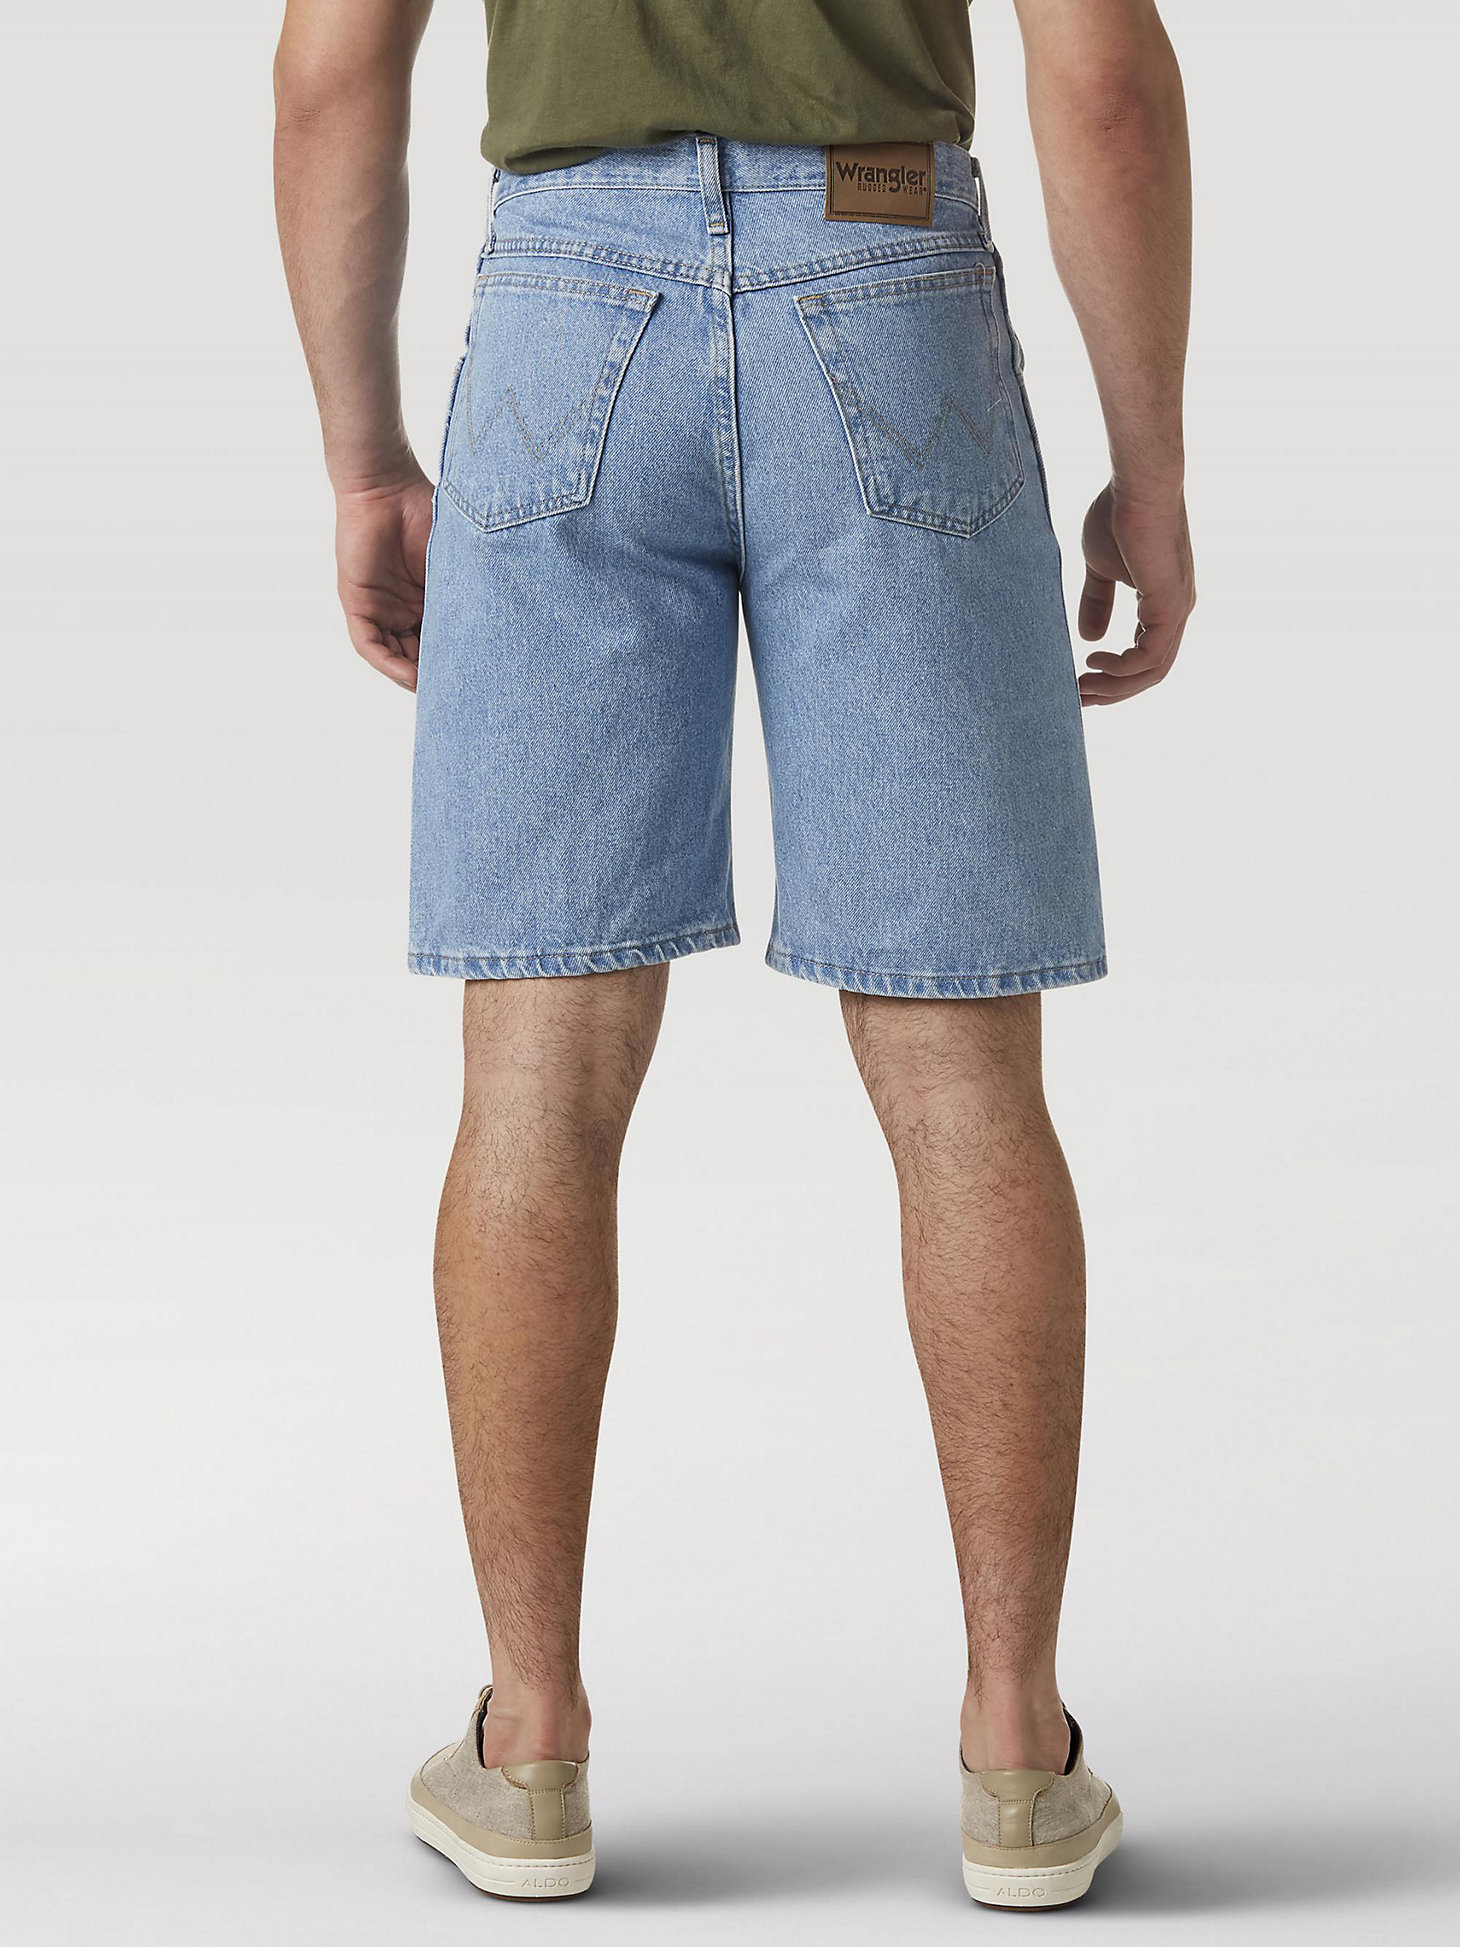 Wrangler Rugged Wear® Relaxed Fit Short in Vintage Indigo alternative view 2